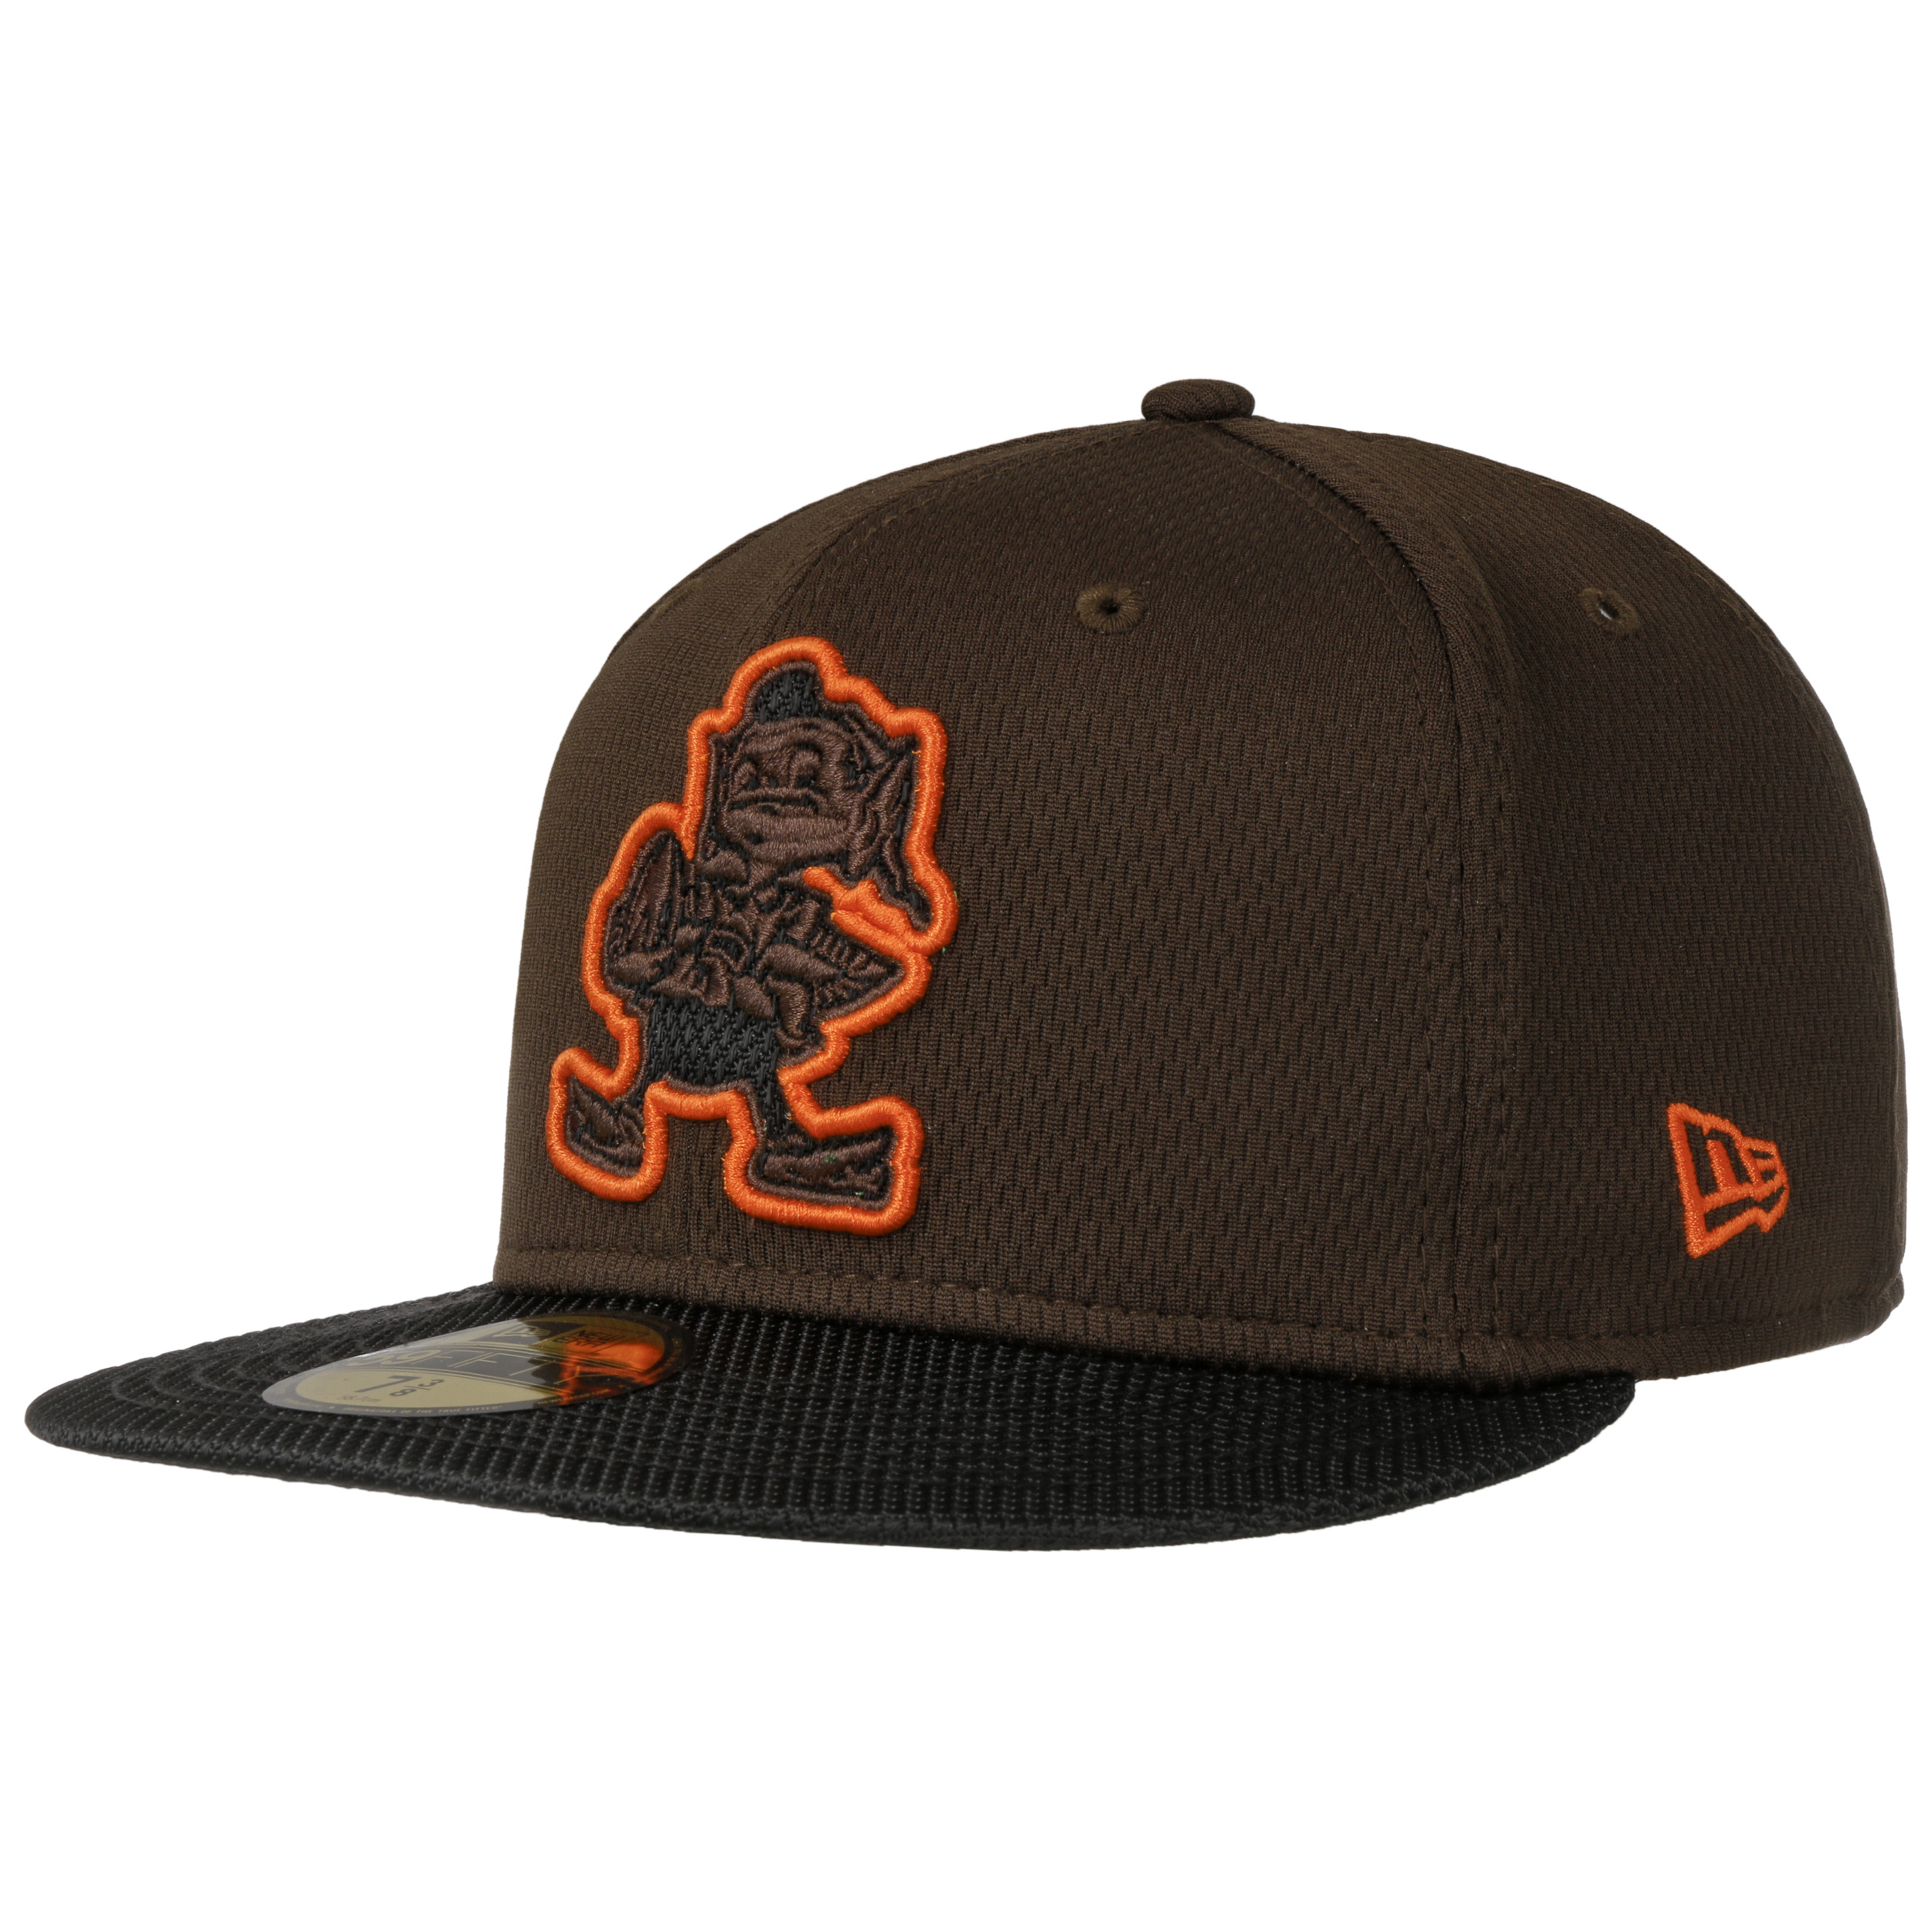 59Fifty Sideline 21 Browns Cap by New 